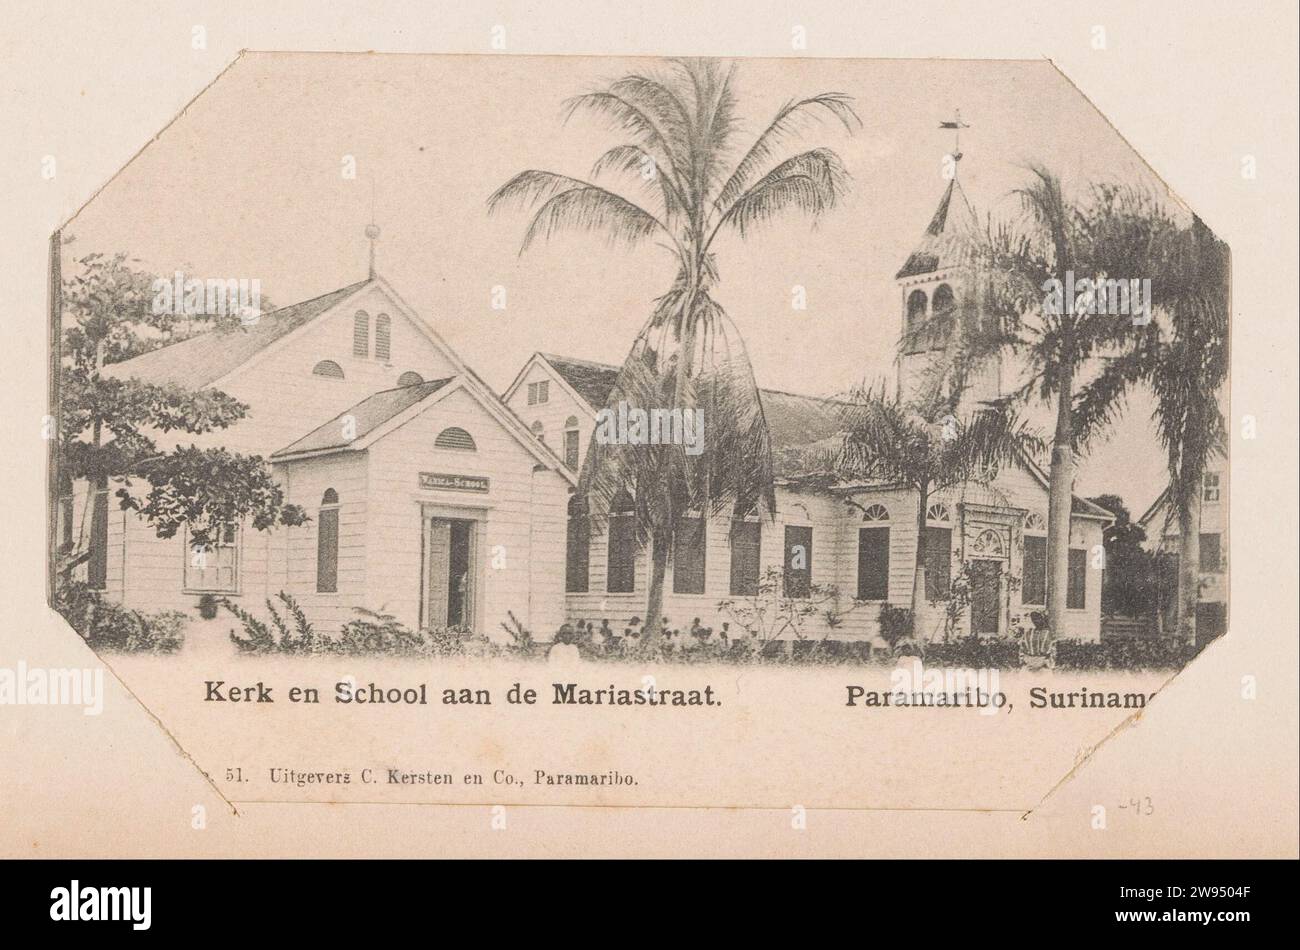 Combékerk on the Grote Combeweg, C. Kersten & Co., Anonymous, 1900 - 1910  The Combékerk of the Evangelische Broedergemeente, on the Grote Combeweg in Paramaribo (referred to as a church and school on Mariastraat on this map). Part of a collection of 68 postcards from Suriname, brought together in an album as a reminder of a stay in Suriname in September 1911. Paramaribo cardboard collotype church (exterior) Paramaribo. Combé. Combékerk Stock Photo